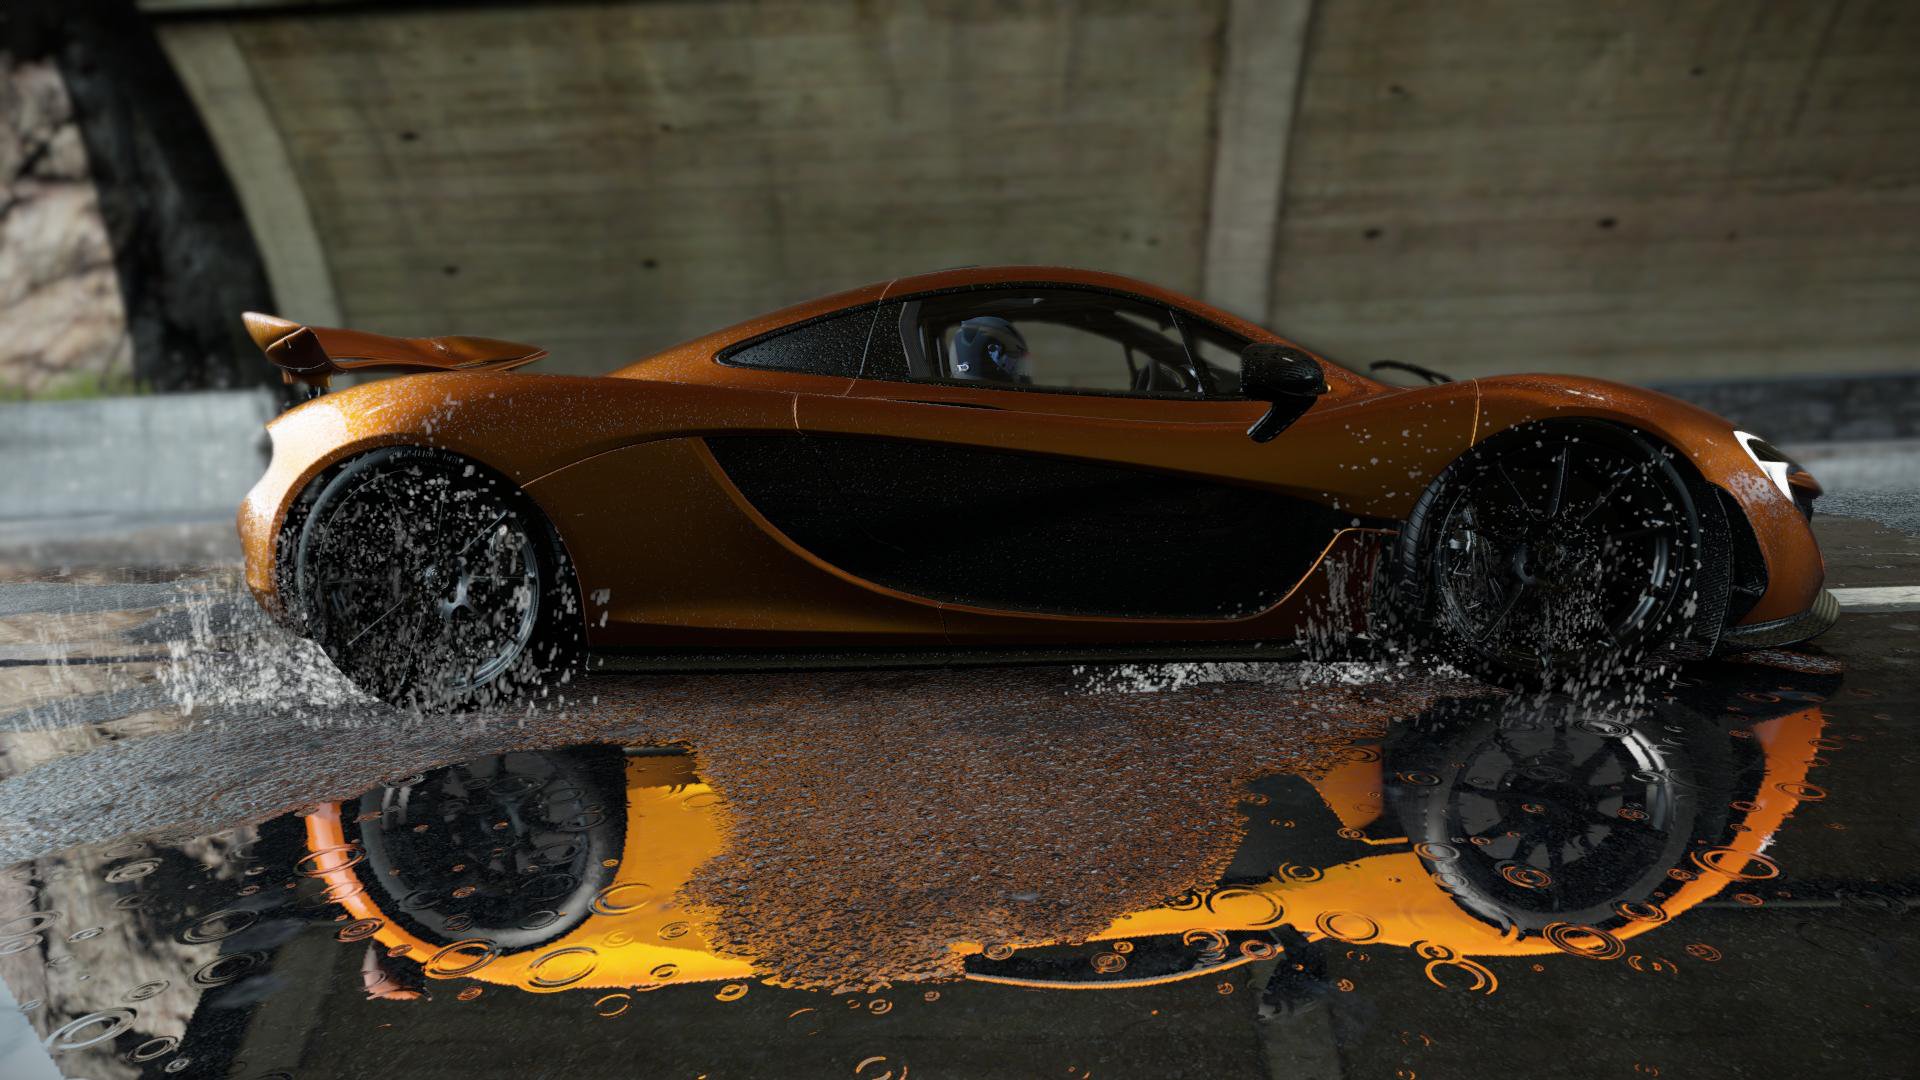 Project Cars Preview